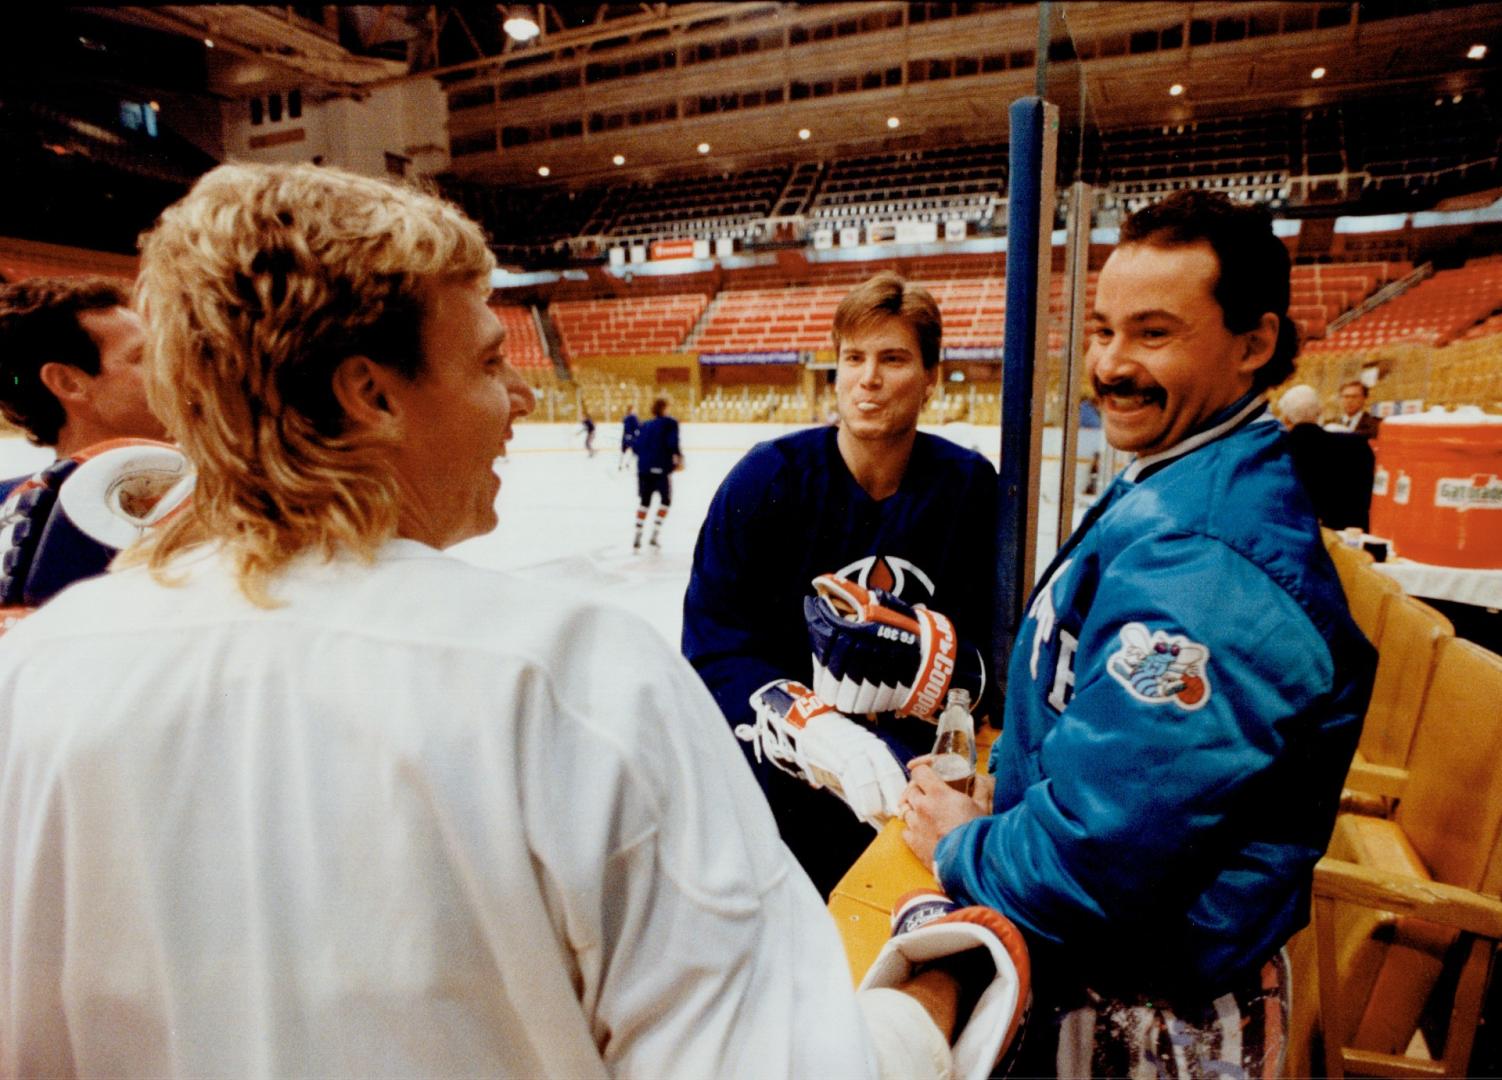 Money talks: And there's no shortage of conversation as Edmonton's Bernie Nicholls, left, and Craig Simpson chat with Leaf netminder Grant Fuhr yesterday